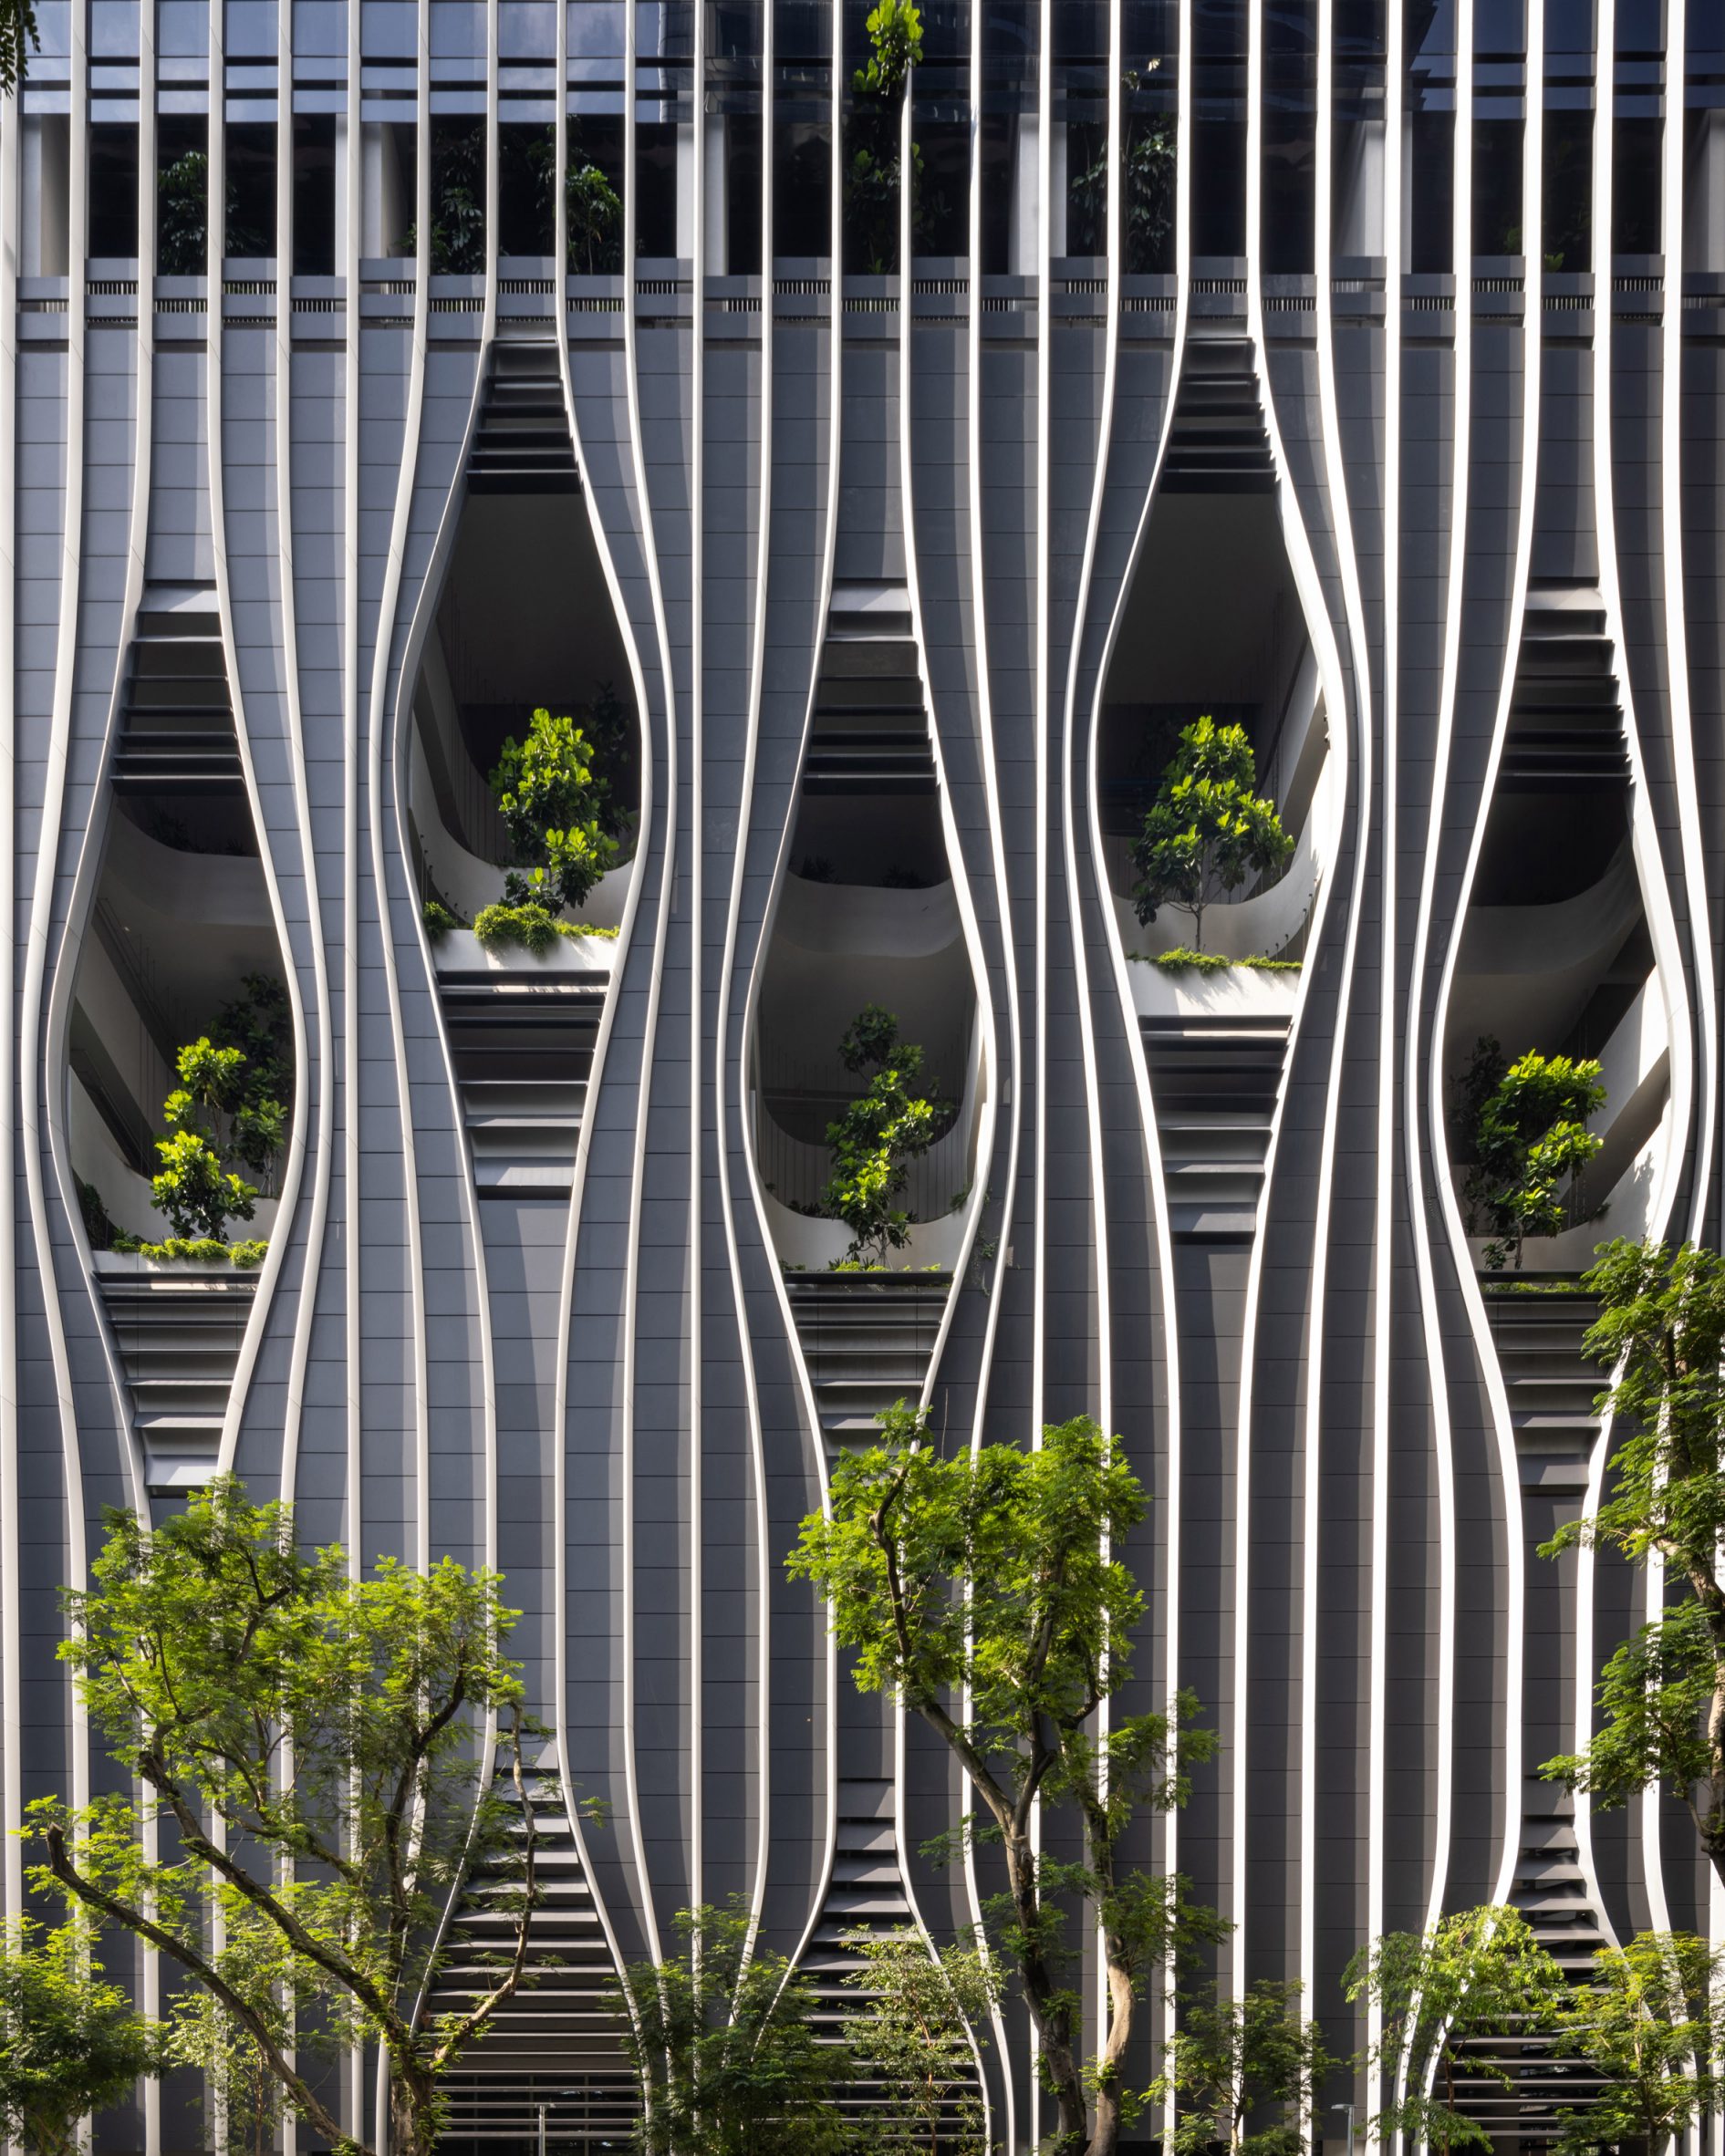 Facade with sculptural openings framing plants